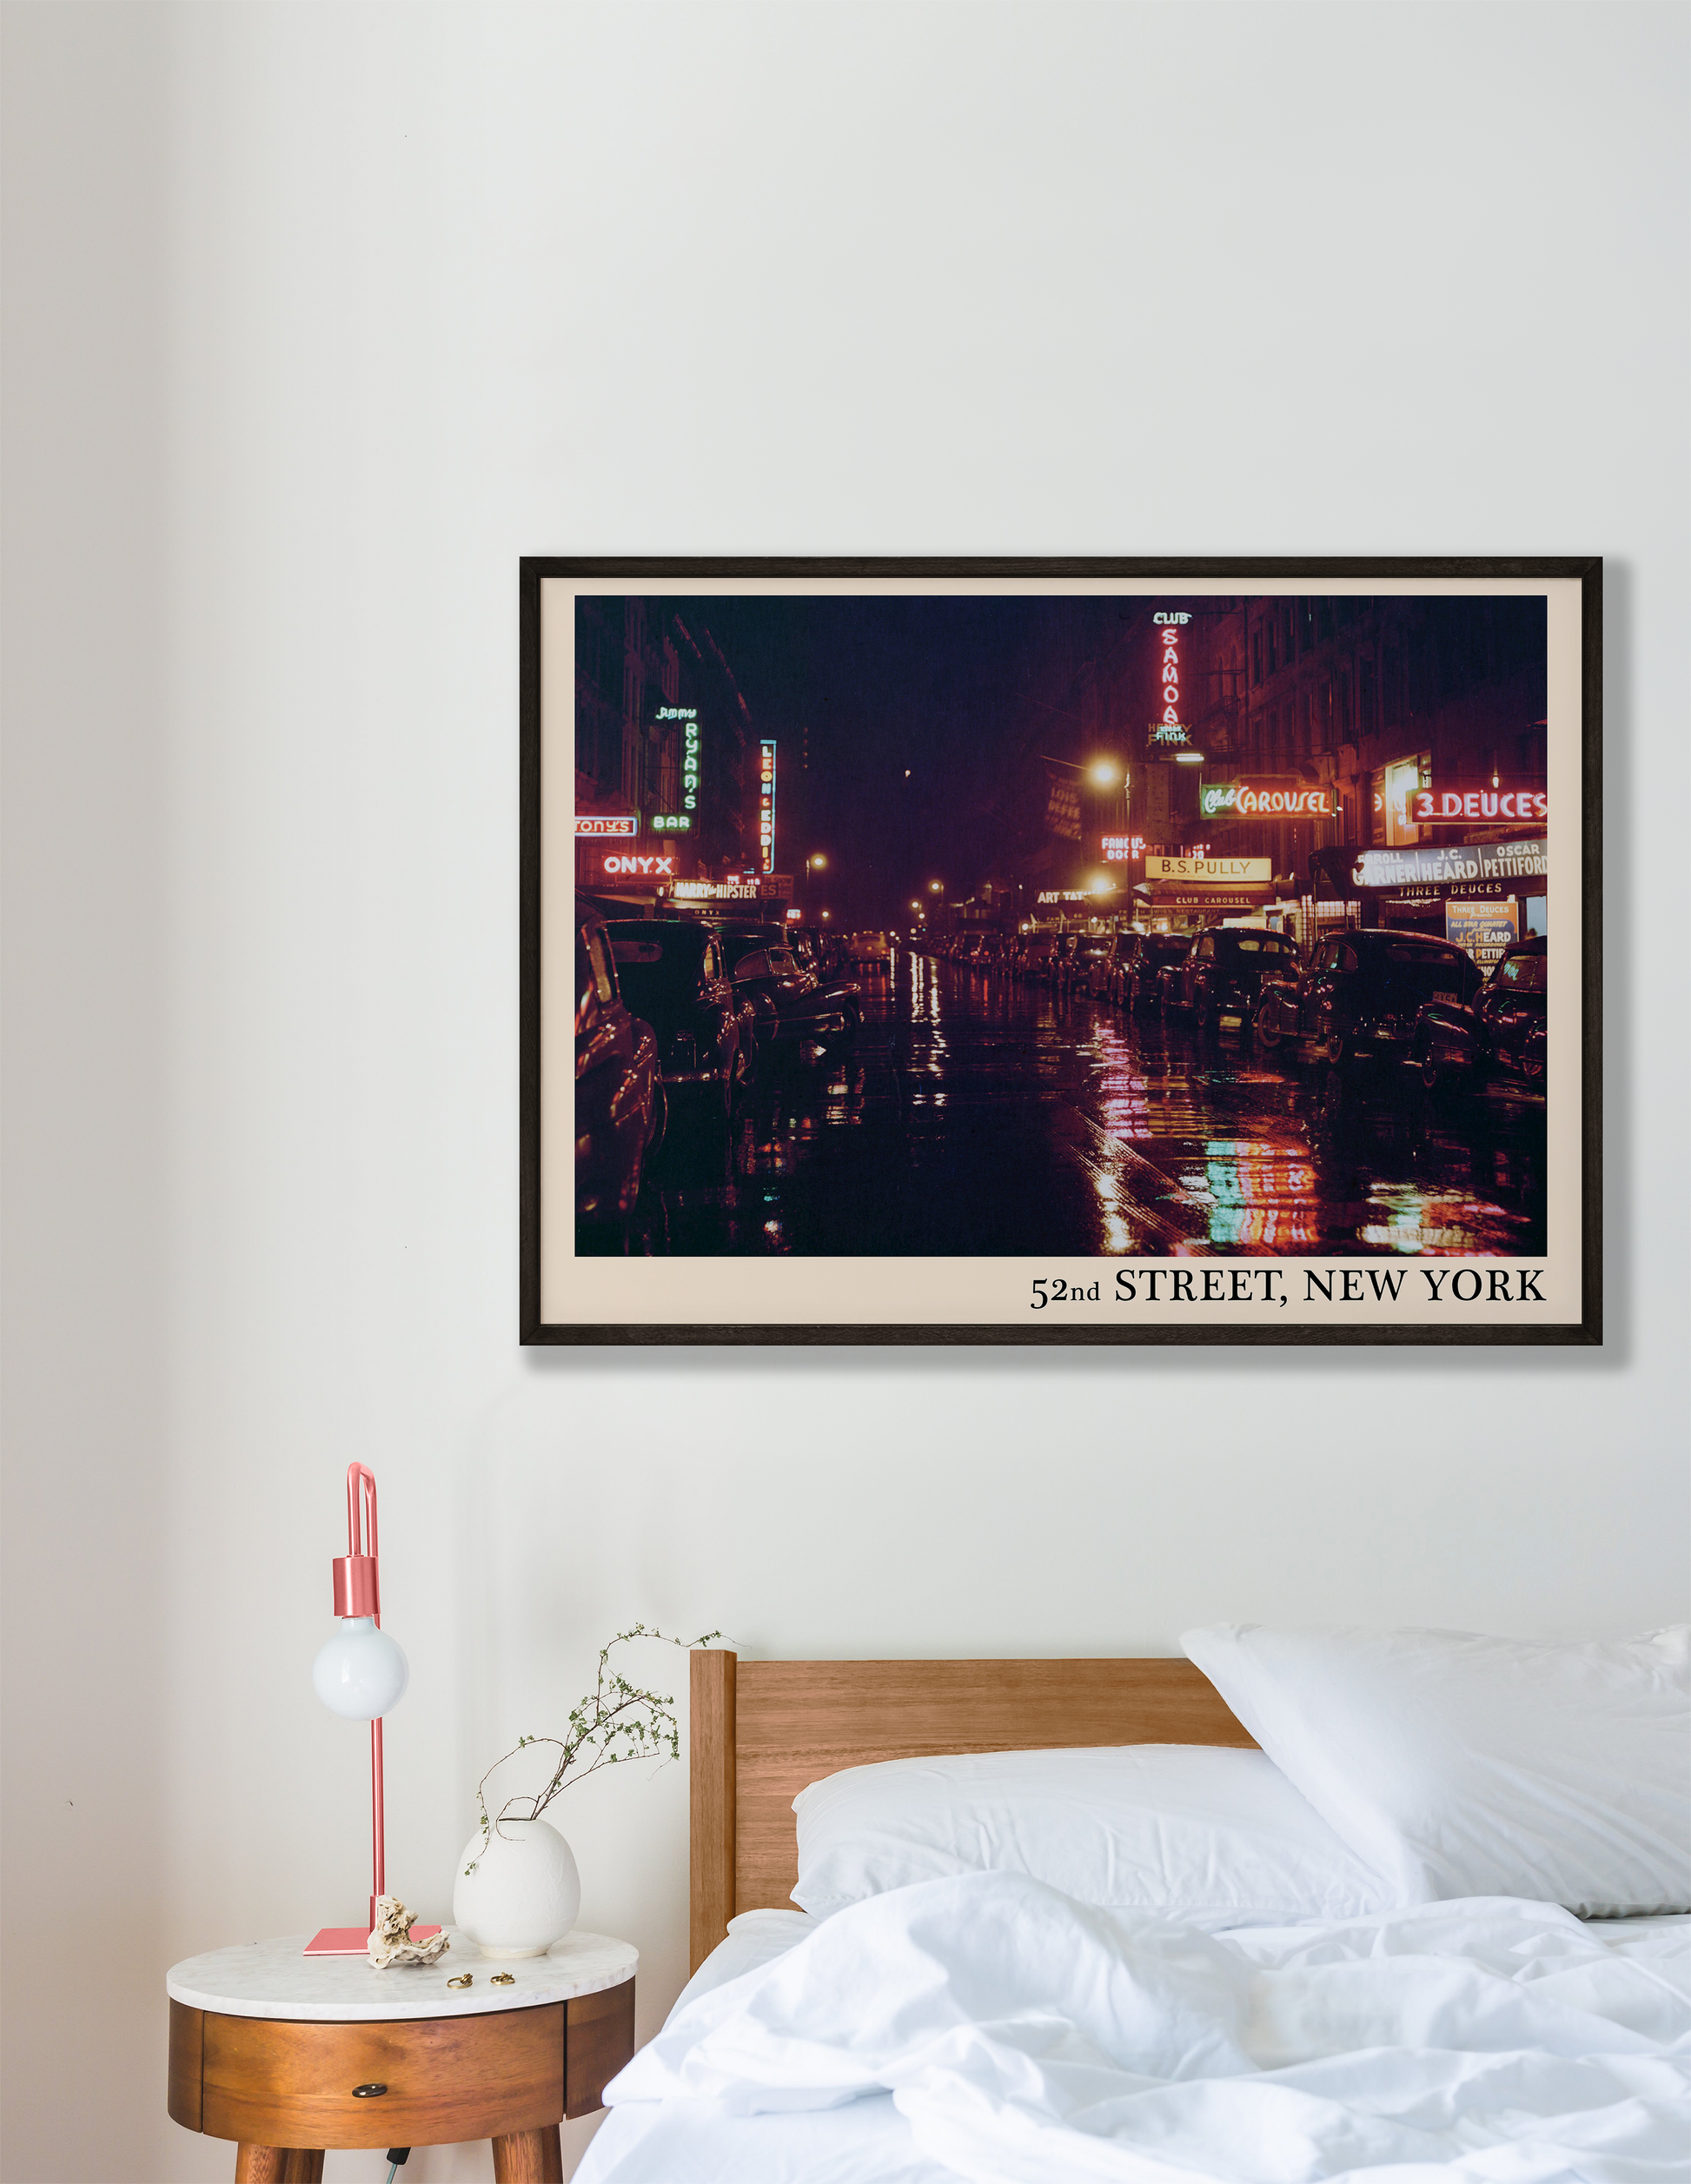 Iconic 52nd Street in New York captured in a retro black framed jazz print, hanging on a white bedroom wall